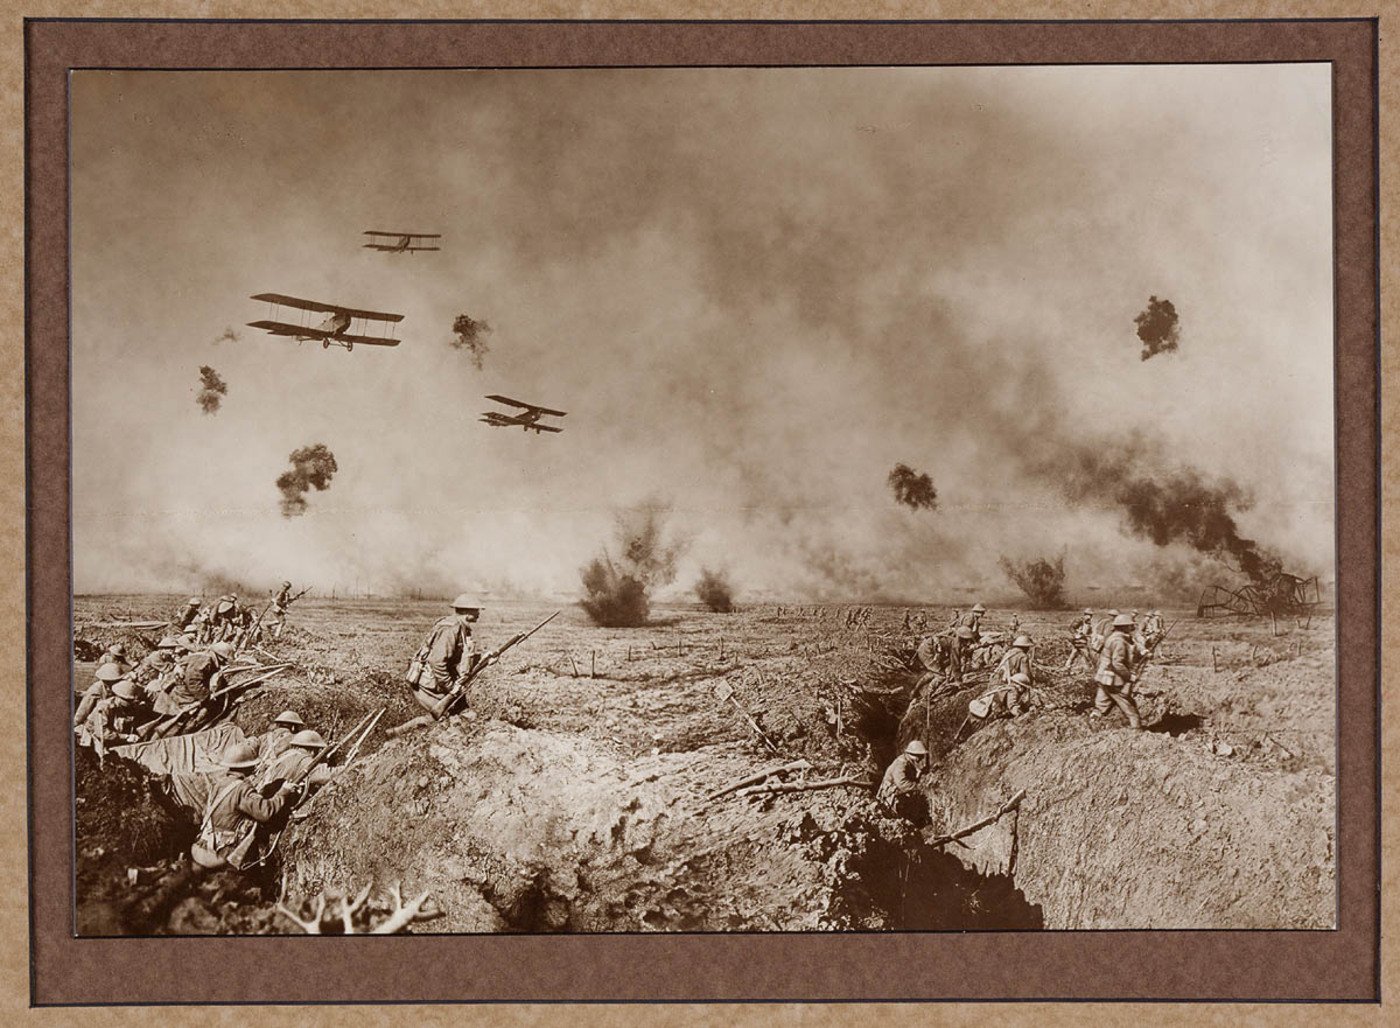 An episode after the Battle of Zonnebeke. Australian Infantry moving forward to resist a counter attack. On the-extreme right a machine brought down in flames is burning fiercely. Our advance is supported by bombing planes...